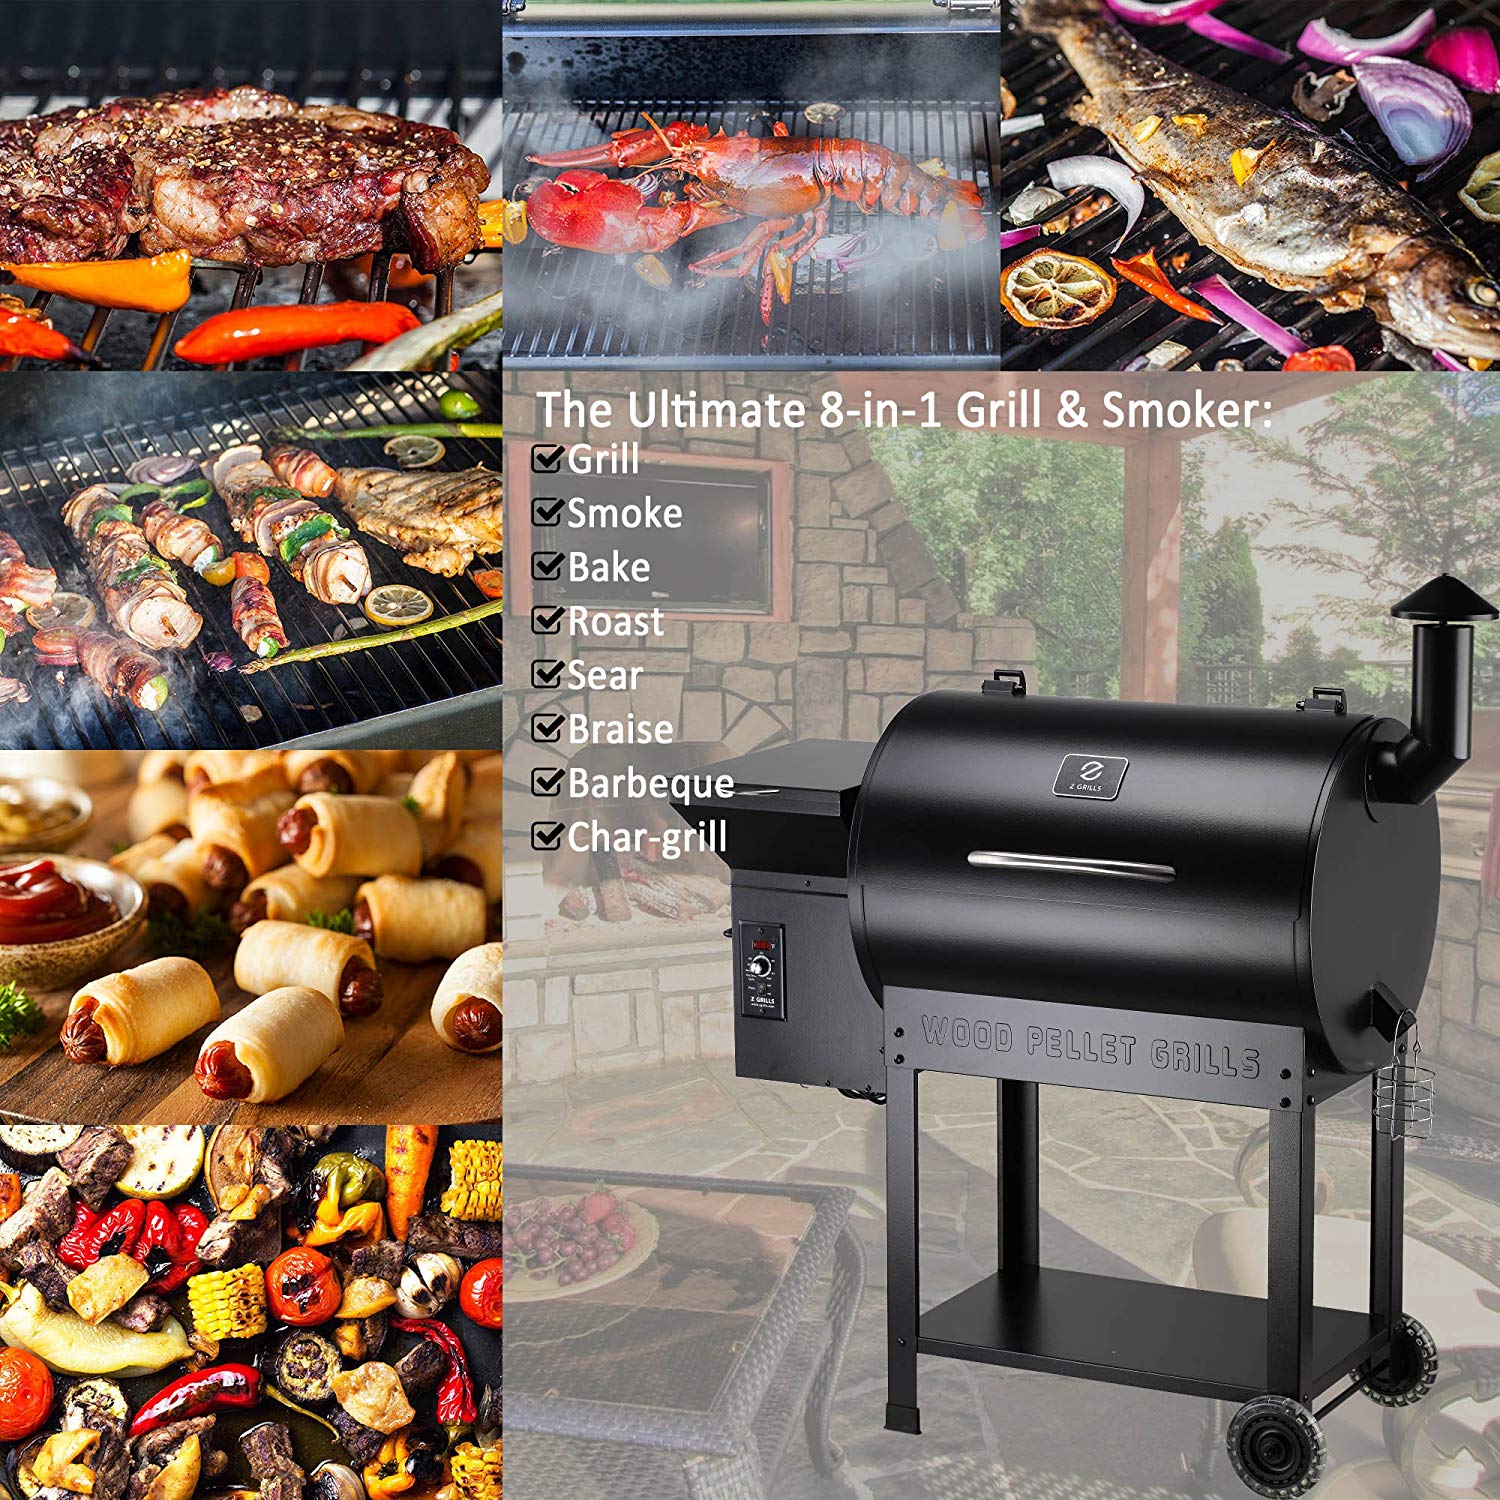 Z GRILLS 7002B Smart Wood Pellet Grill 8 in 1 Outdoor BBQ Smoker 700 SQ Inches Cooking Area  Barbecue Grill Black - image 2 of 8